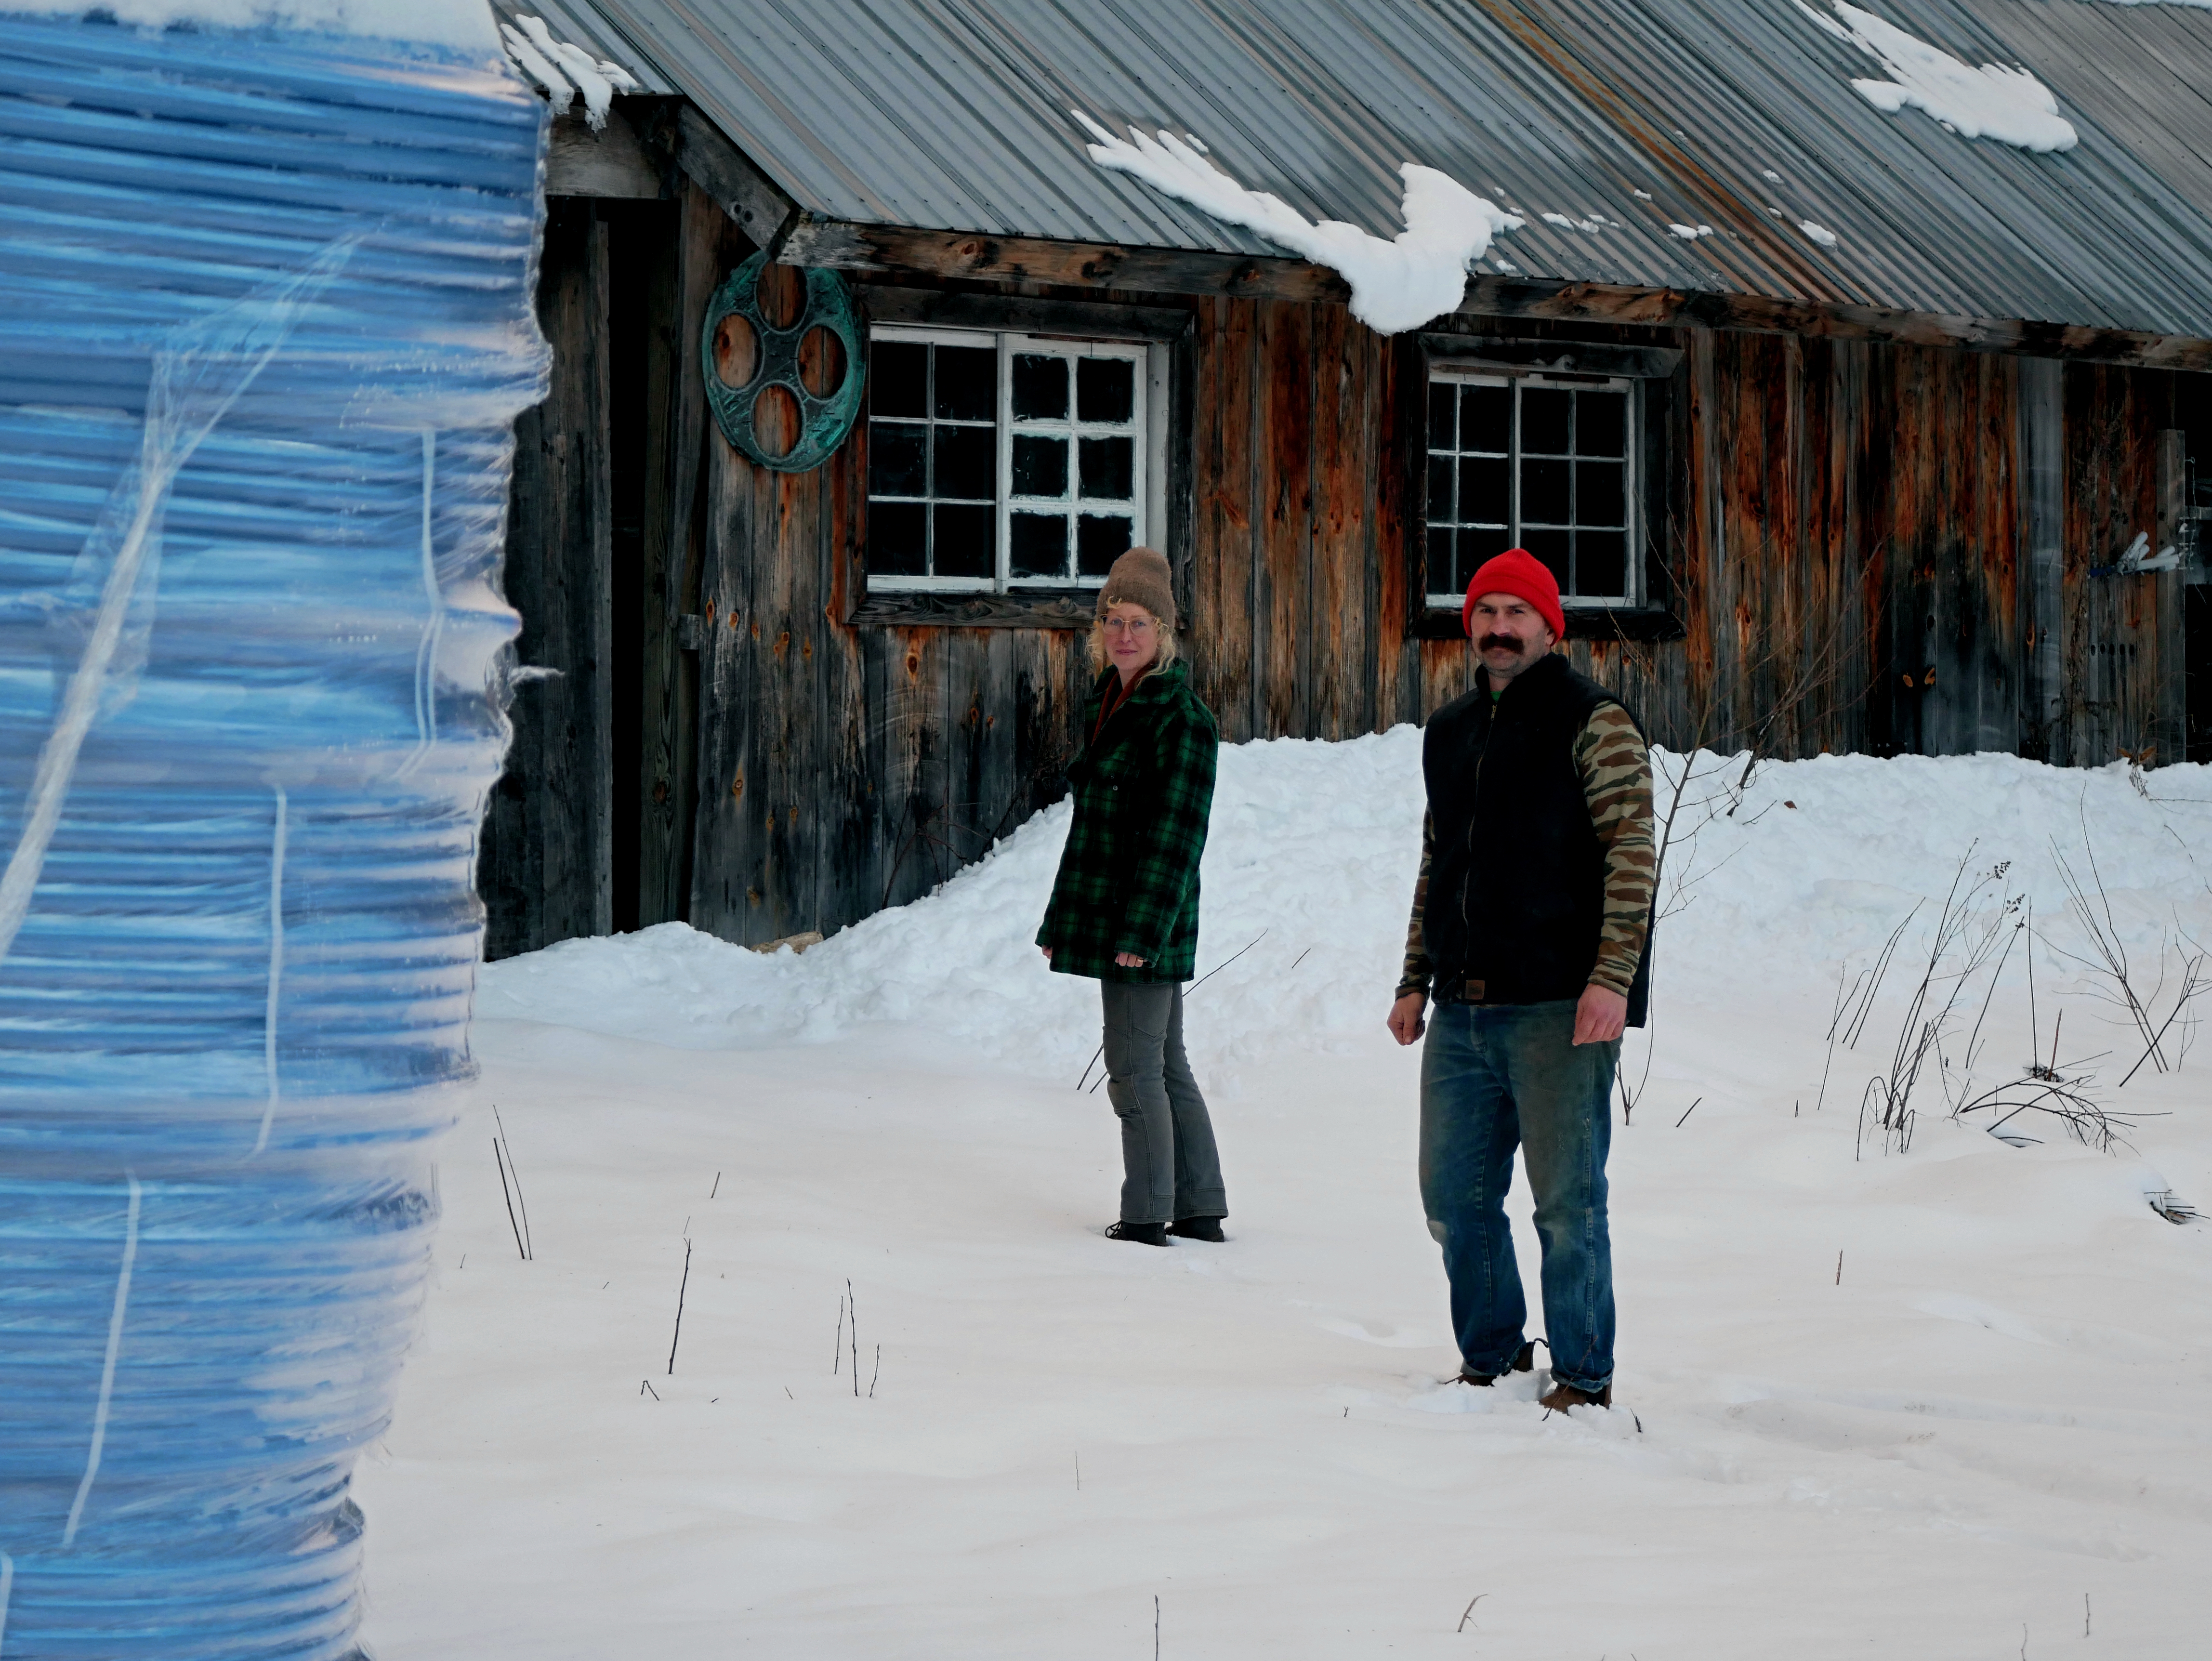 A coil roll of sap lines in the foreground. Chris and Kari walk into a building in the snow in the background.